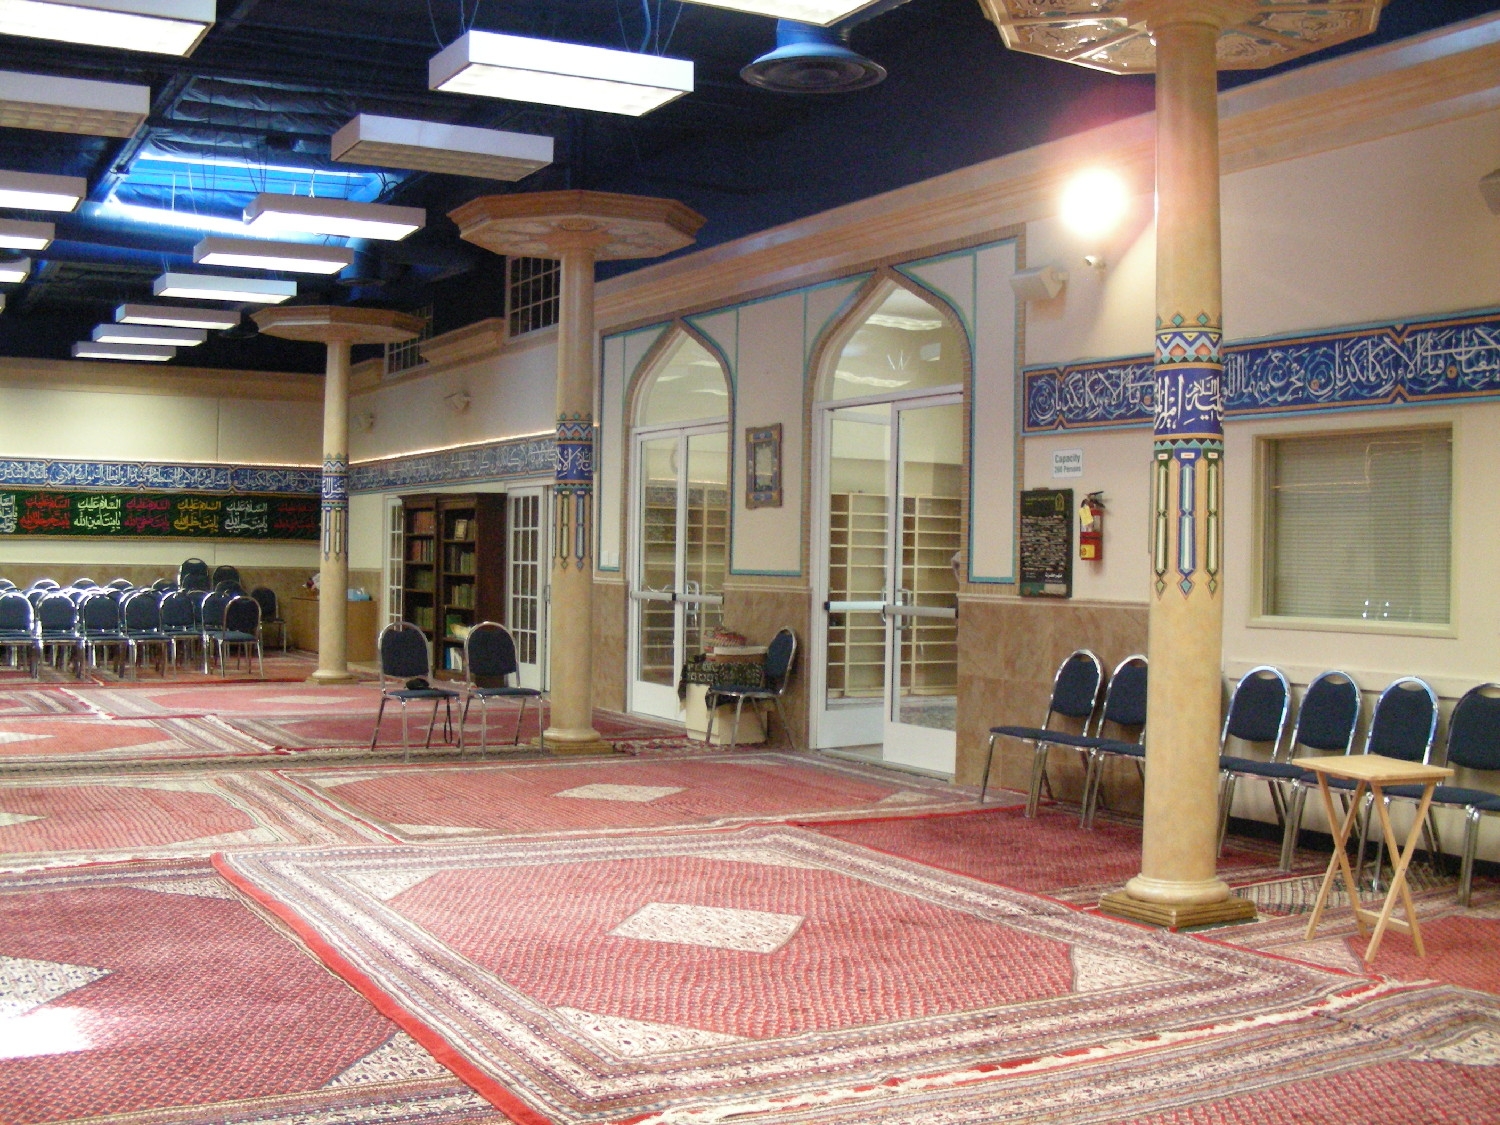 Prayer hall, view to entrance doors